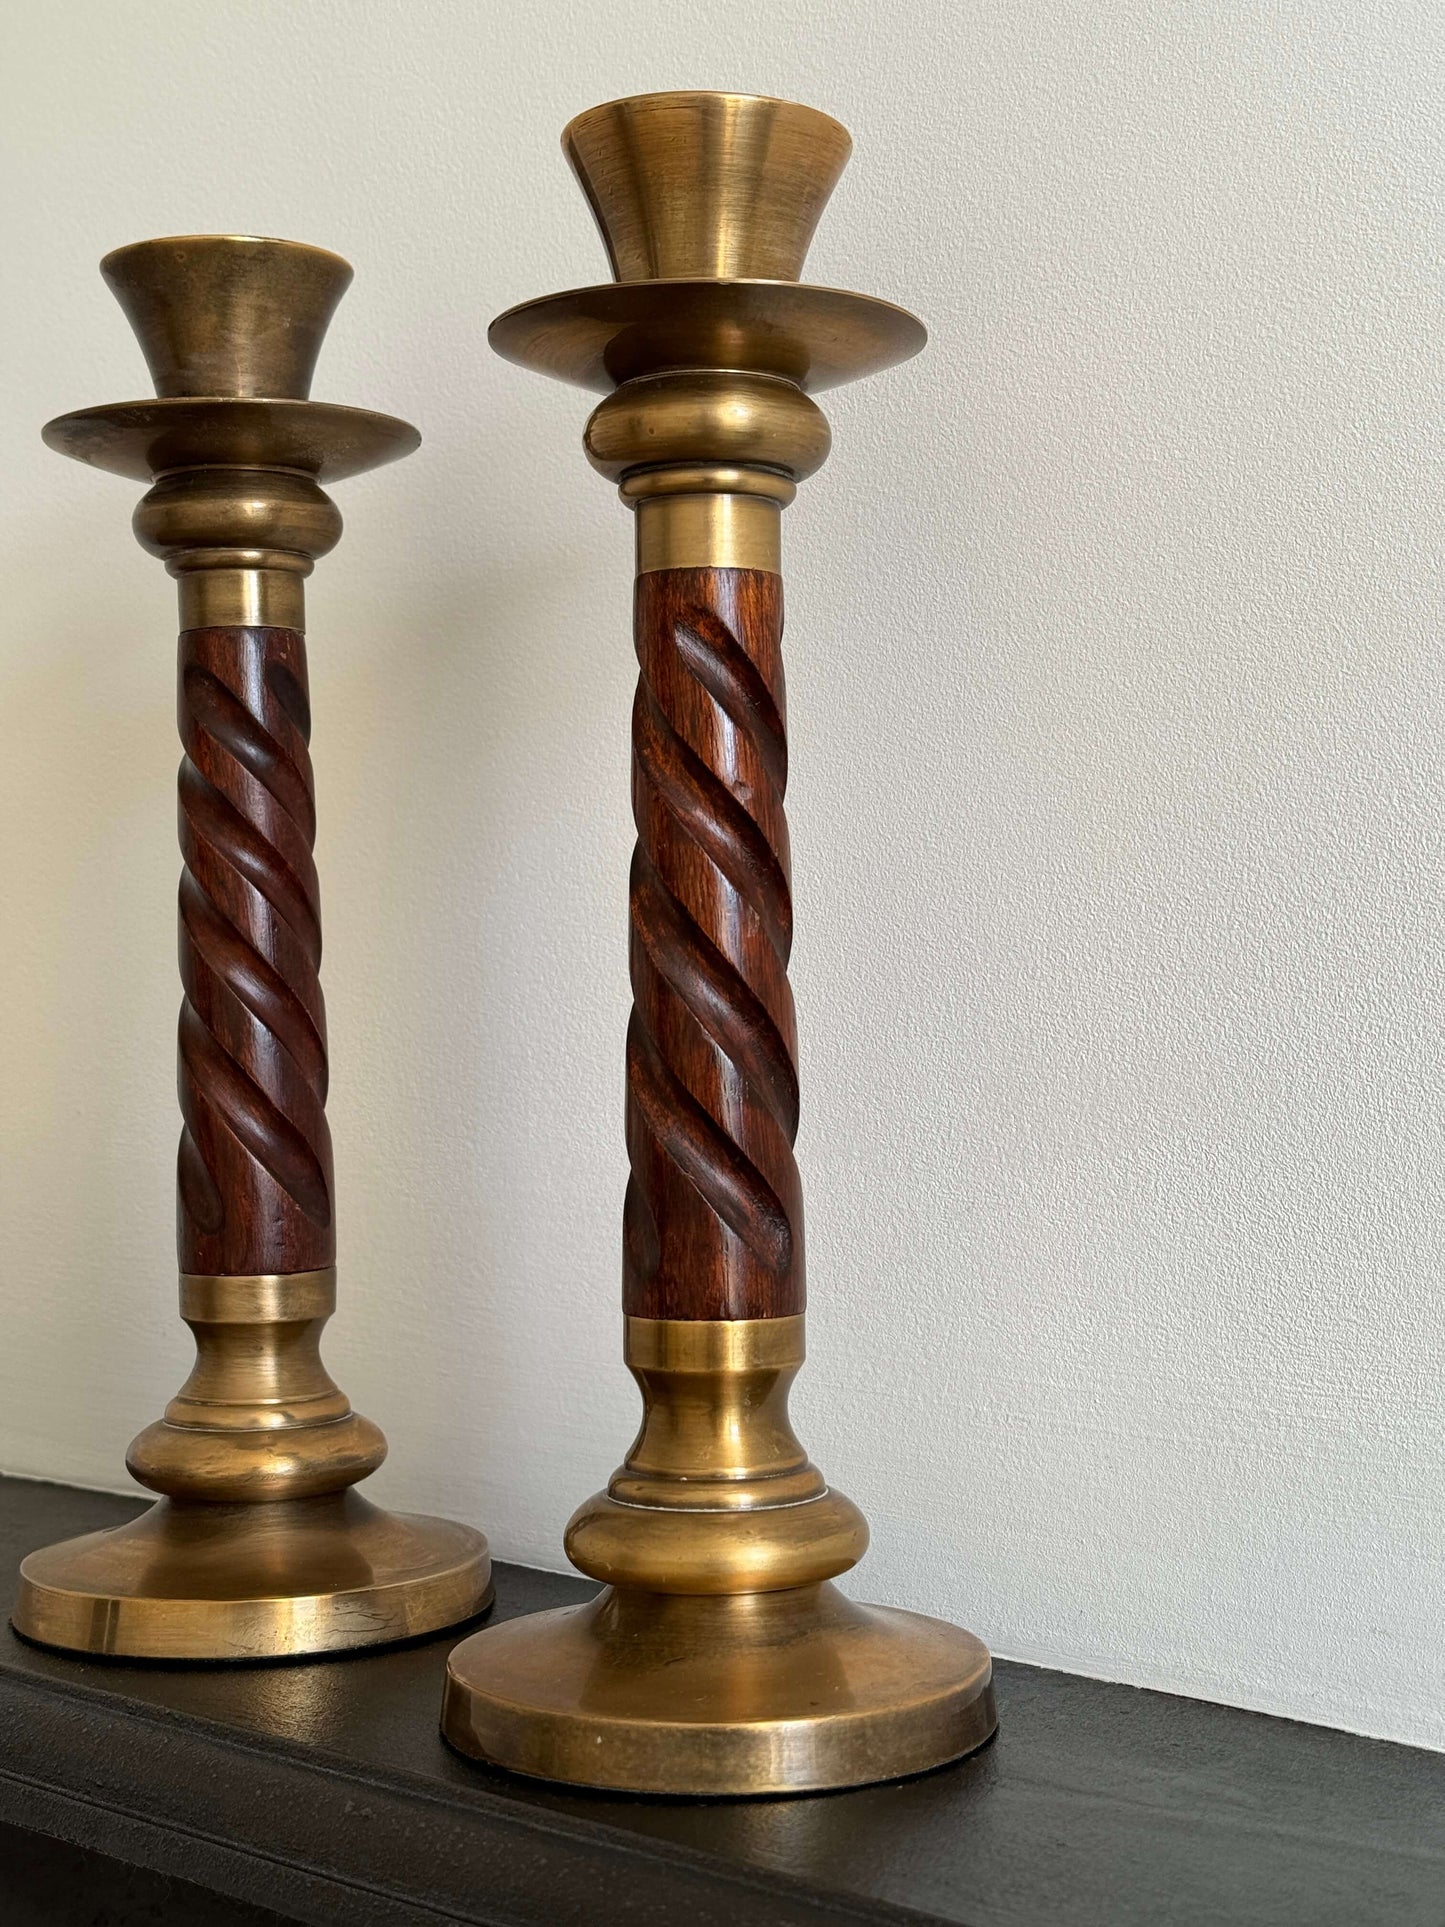 Pair of French twisted candlestick holders